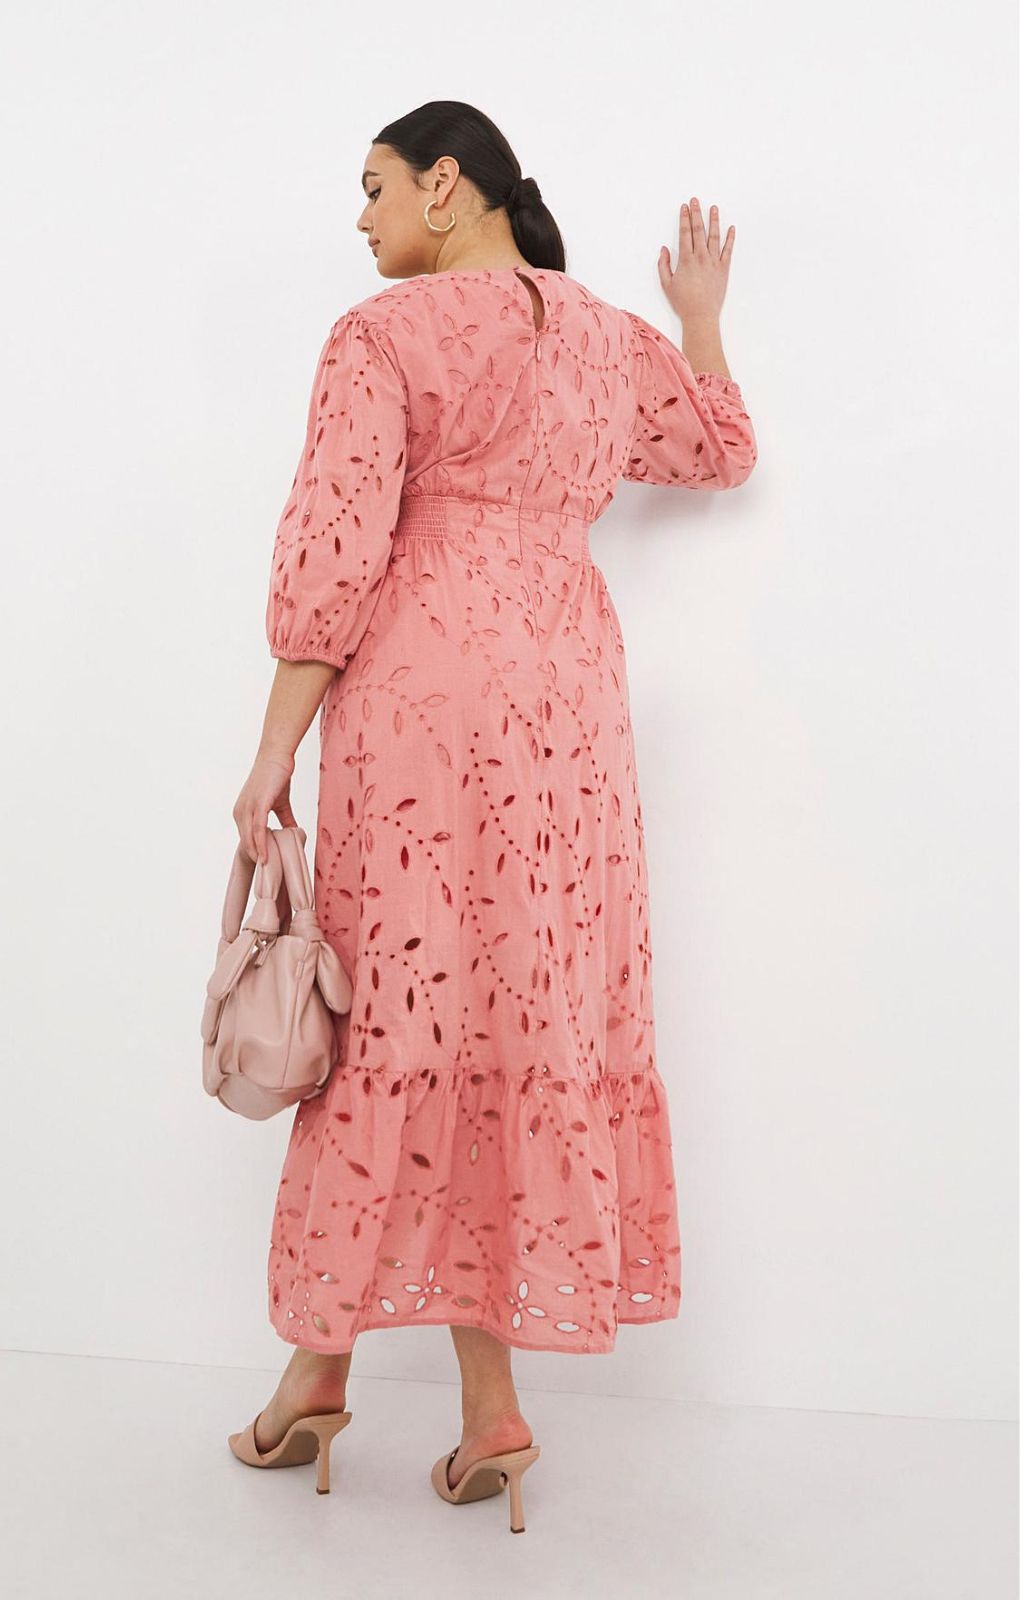 Simply Be Blush Broderie Dress product image